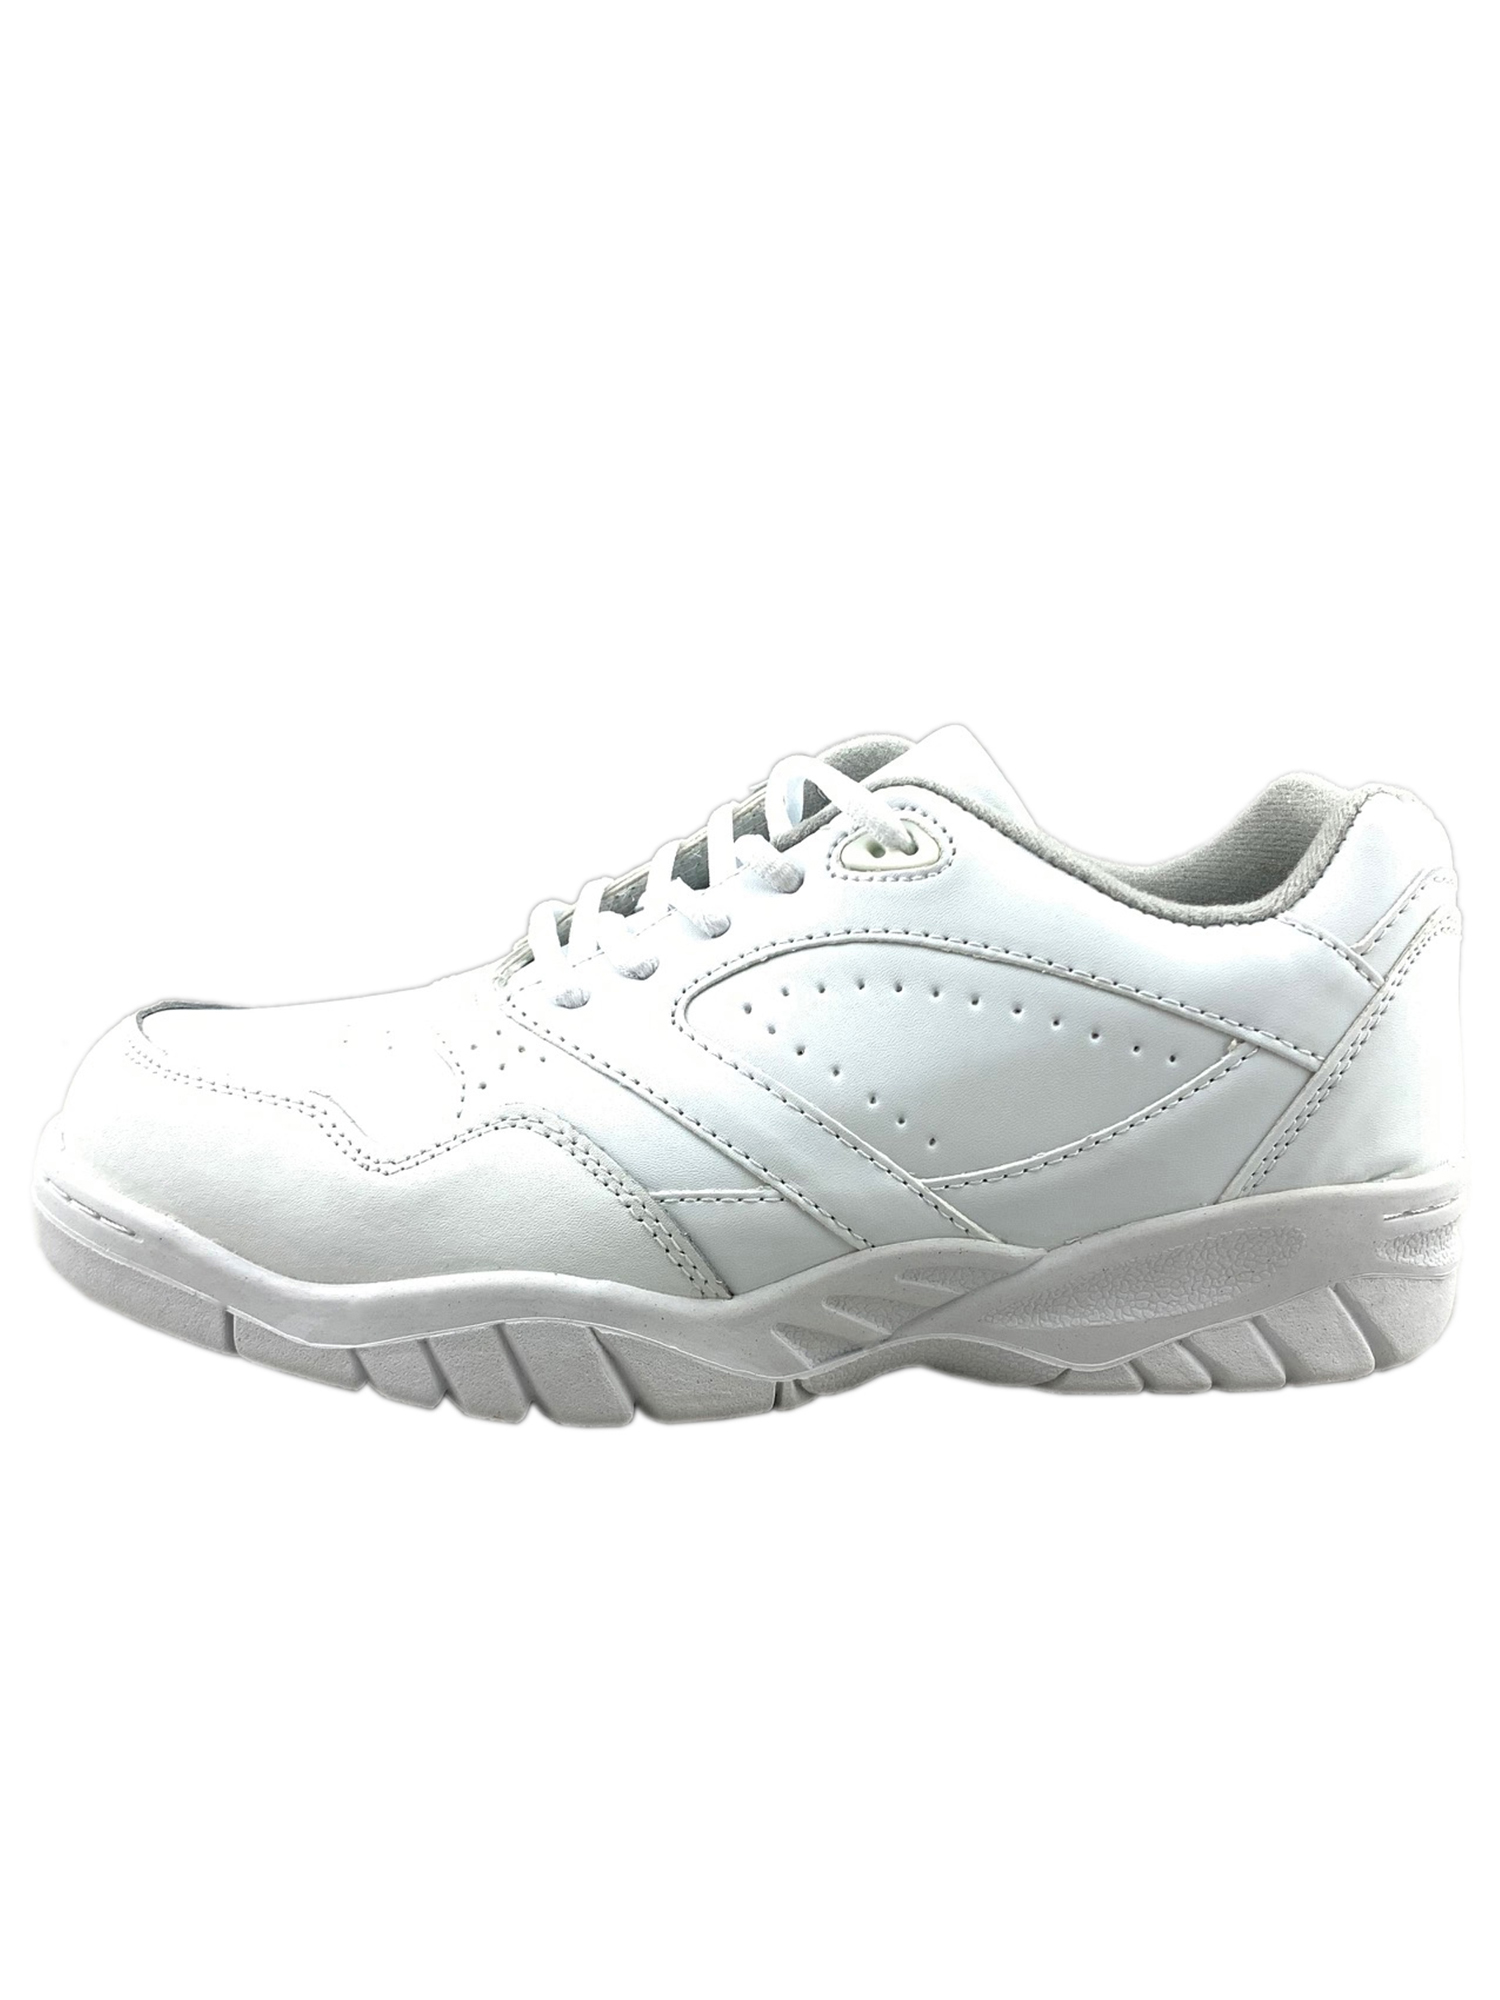 Tanleewa Men's Leather Sneakers Non-Slip Sports Shoes Lightweight Tennis Shoe Size 12 - image 3 of 5